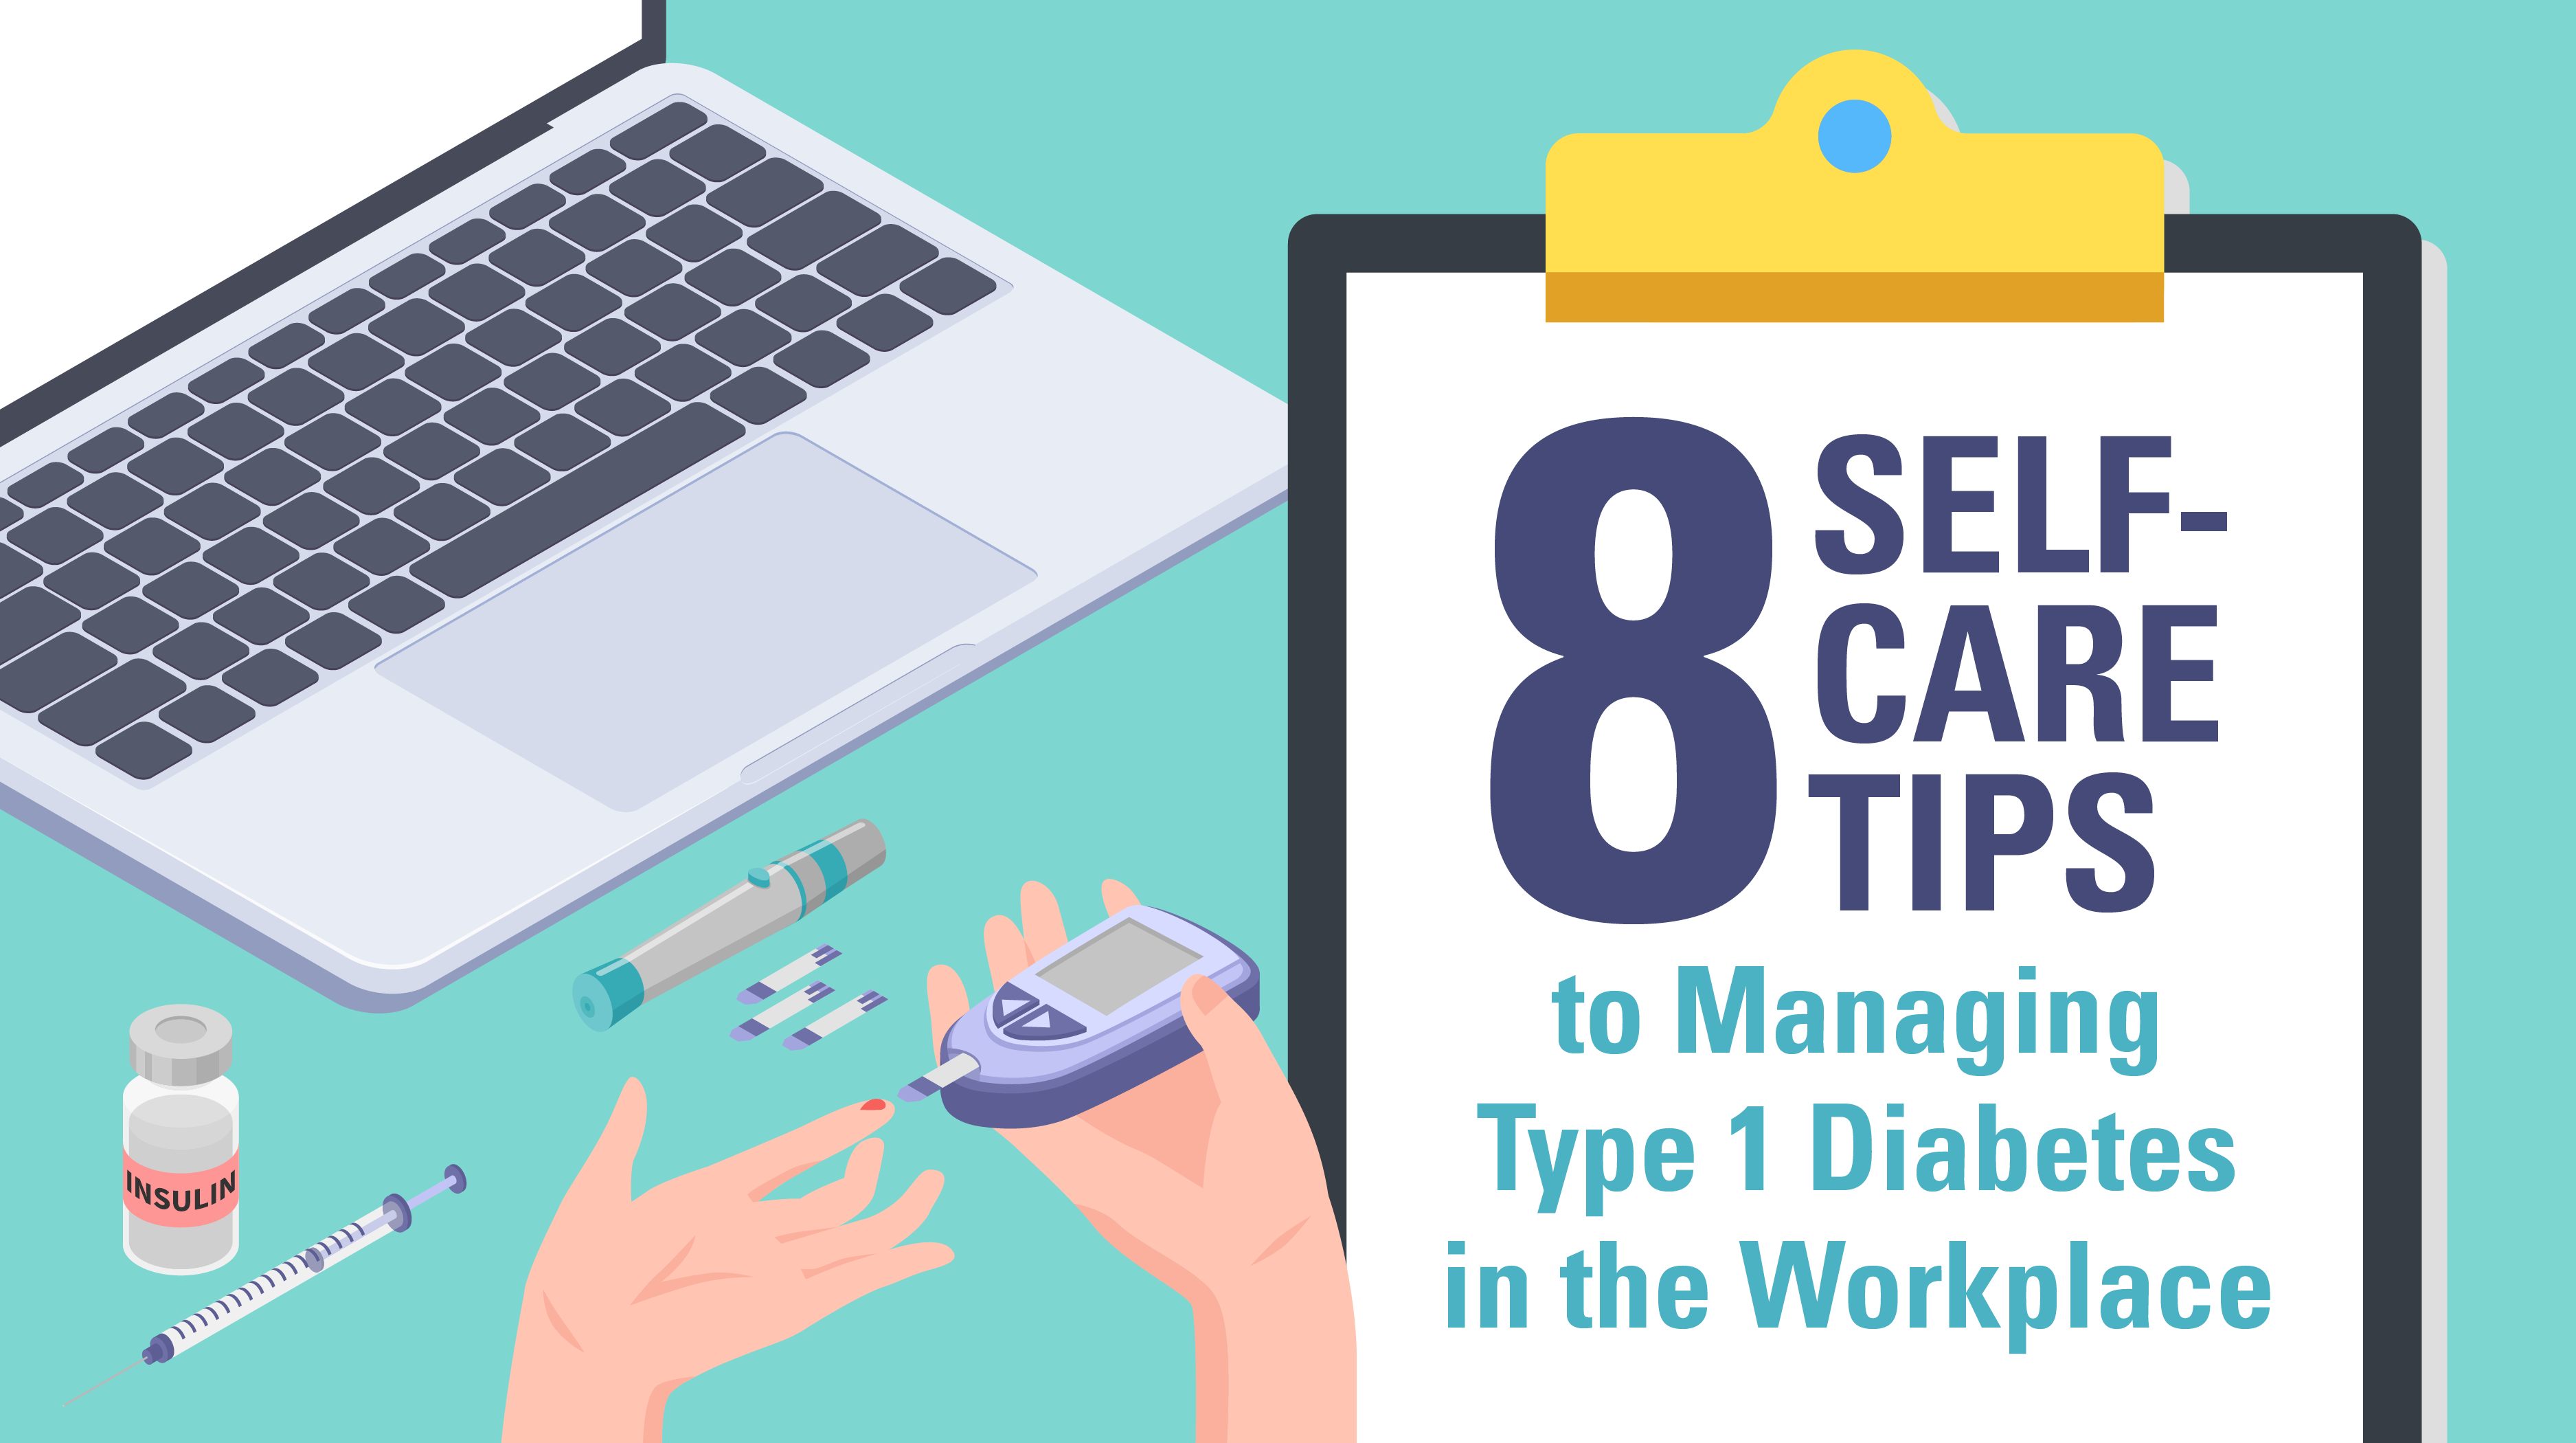 8 Self-Care Tips to Managing Type 1 Diabetes in the Workplace